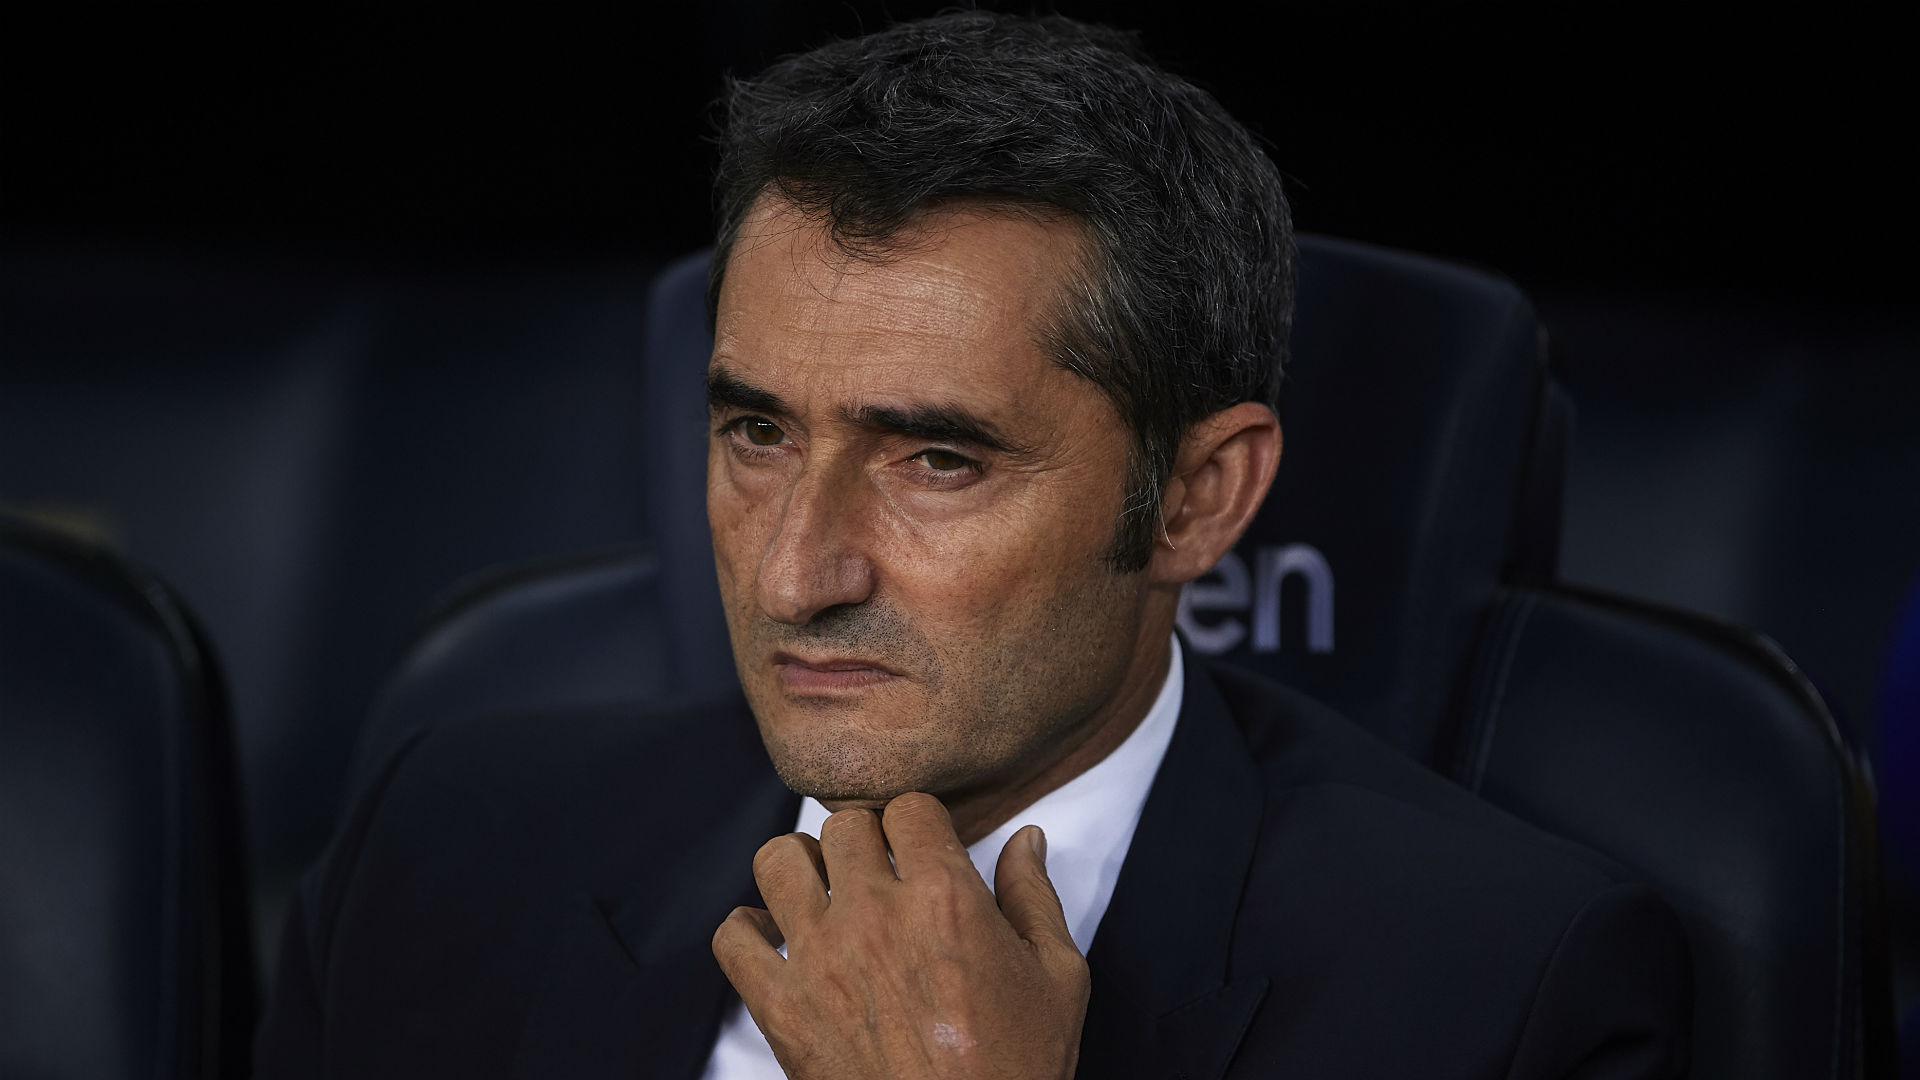 Losing is fine because it forces us to react, says Barca boss Valverde